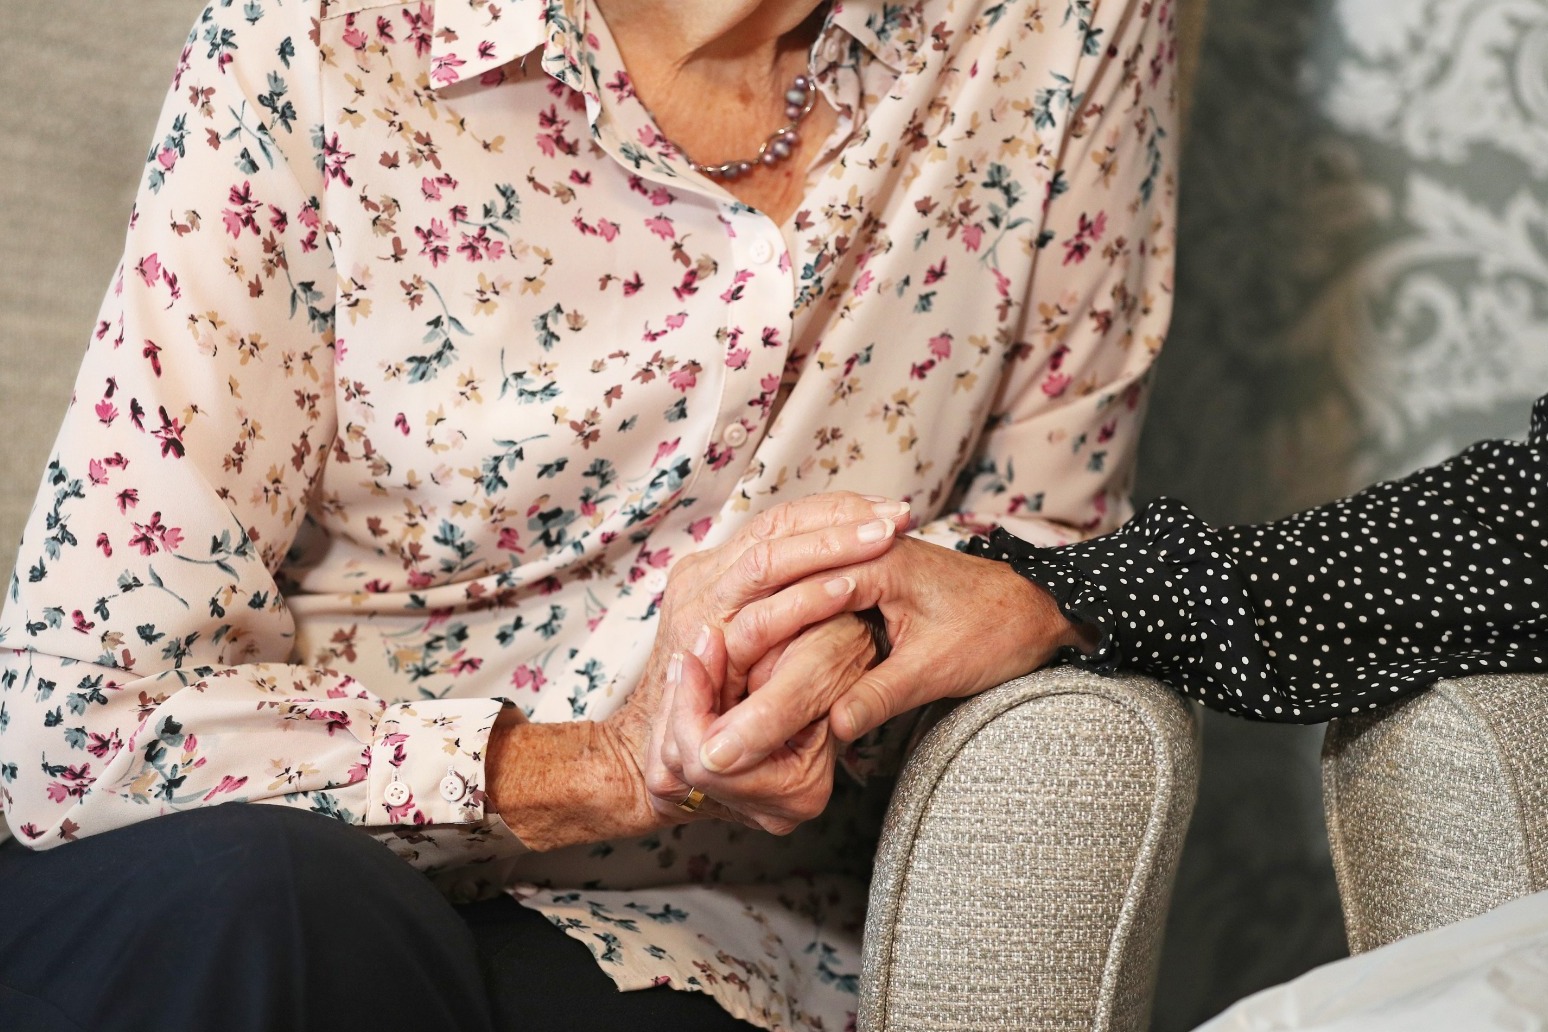 Human rights of people in care at risk due to slow progress on visiting – report 